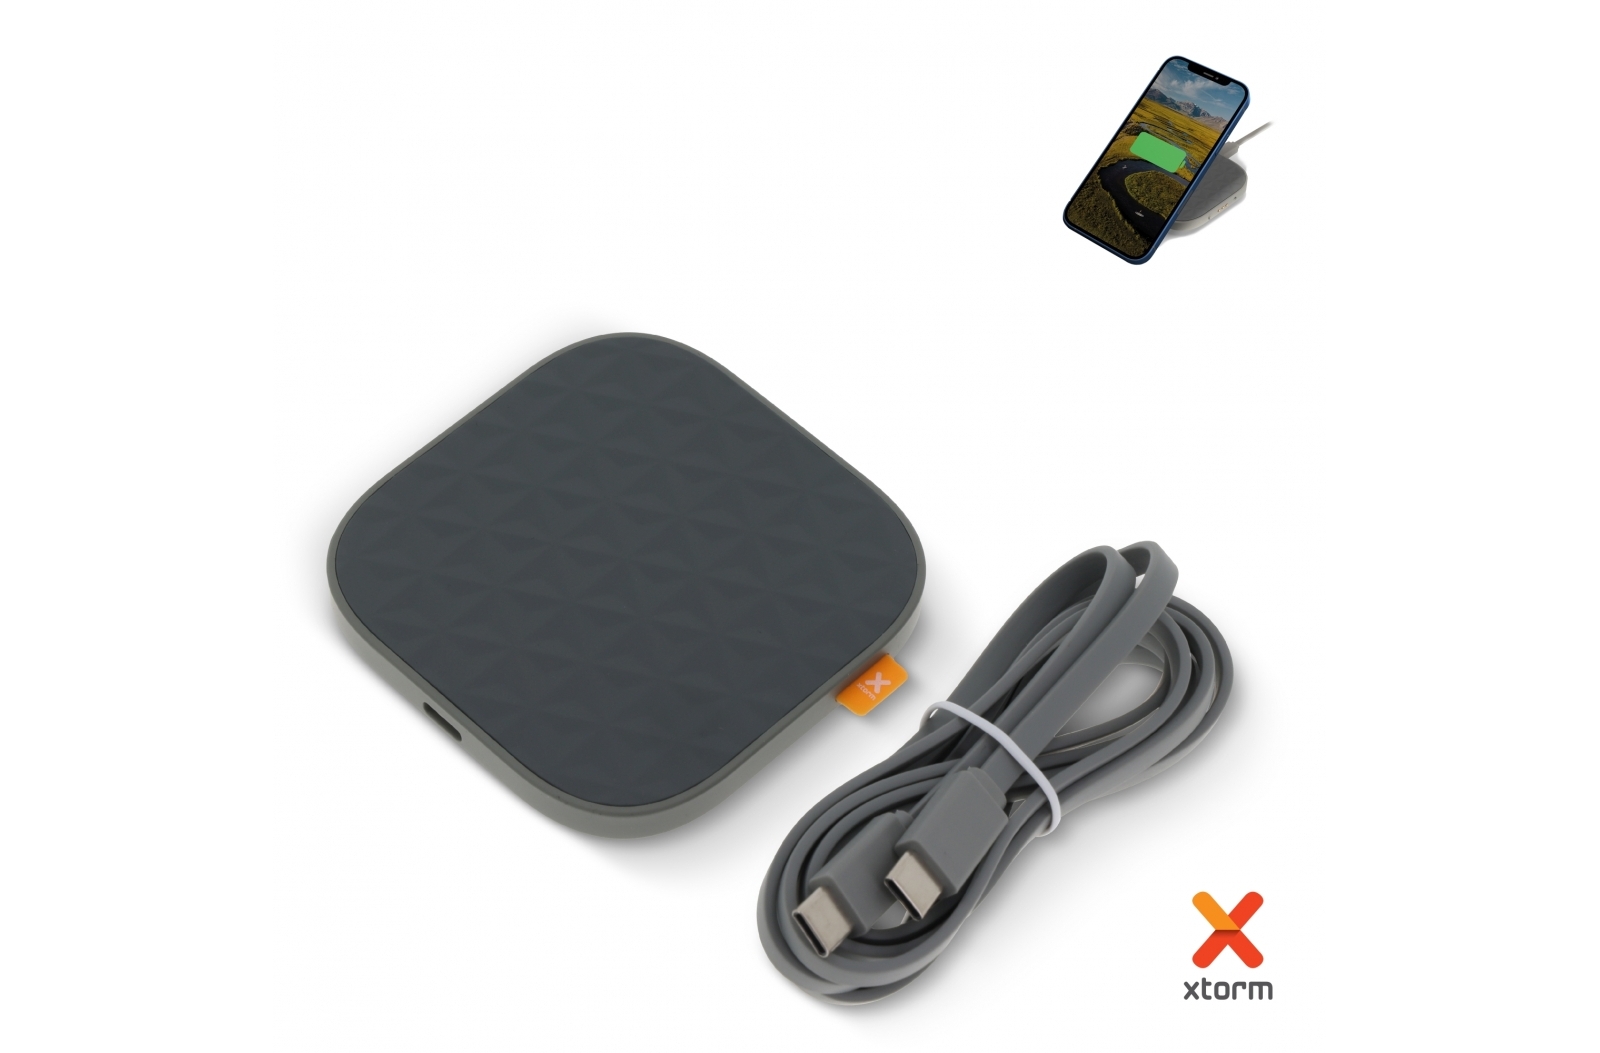 Xtorm Wireless Charger - Dunsfold - Aughton